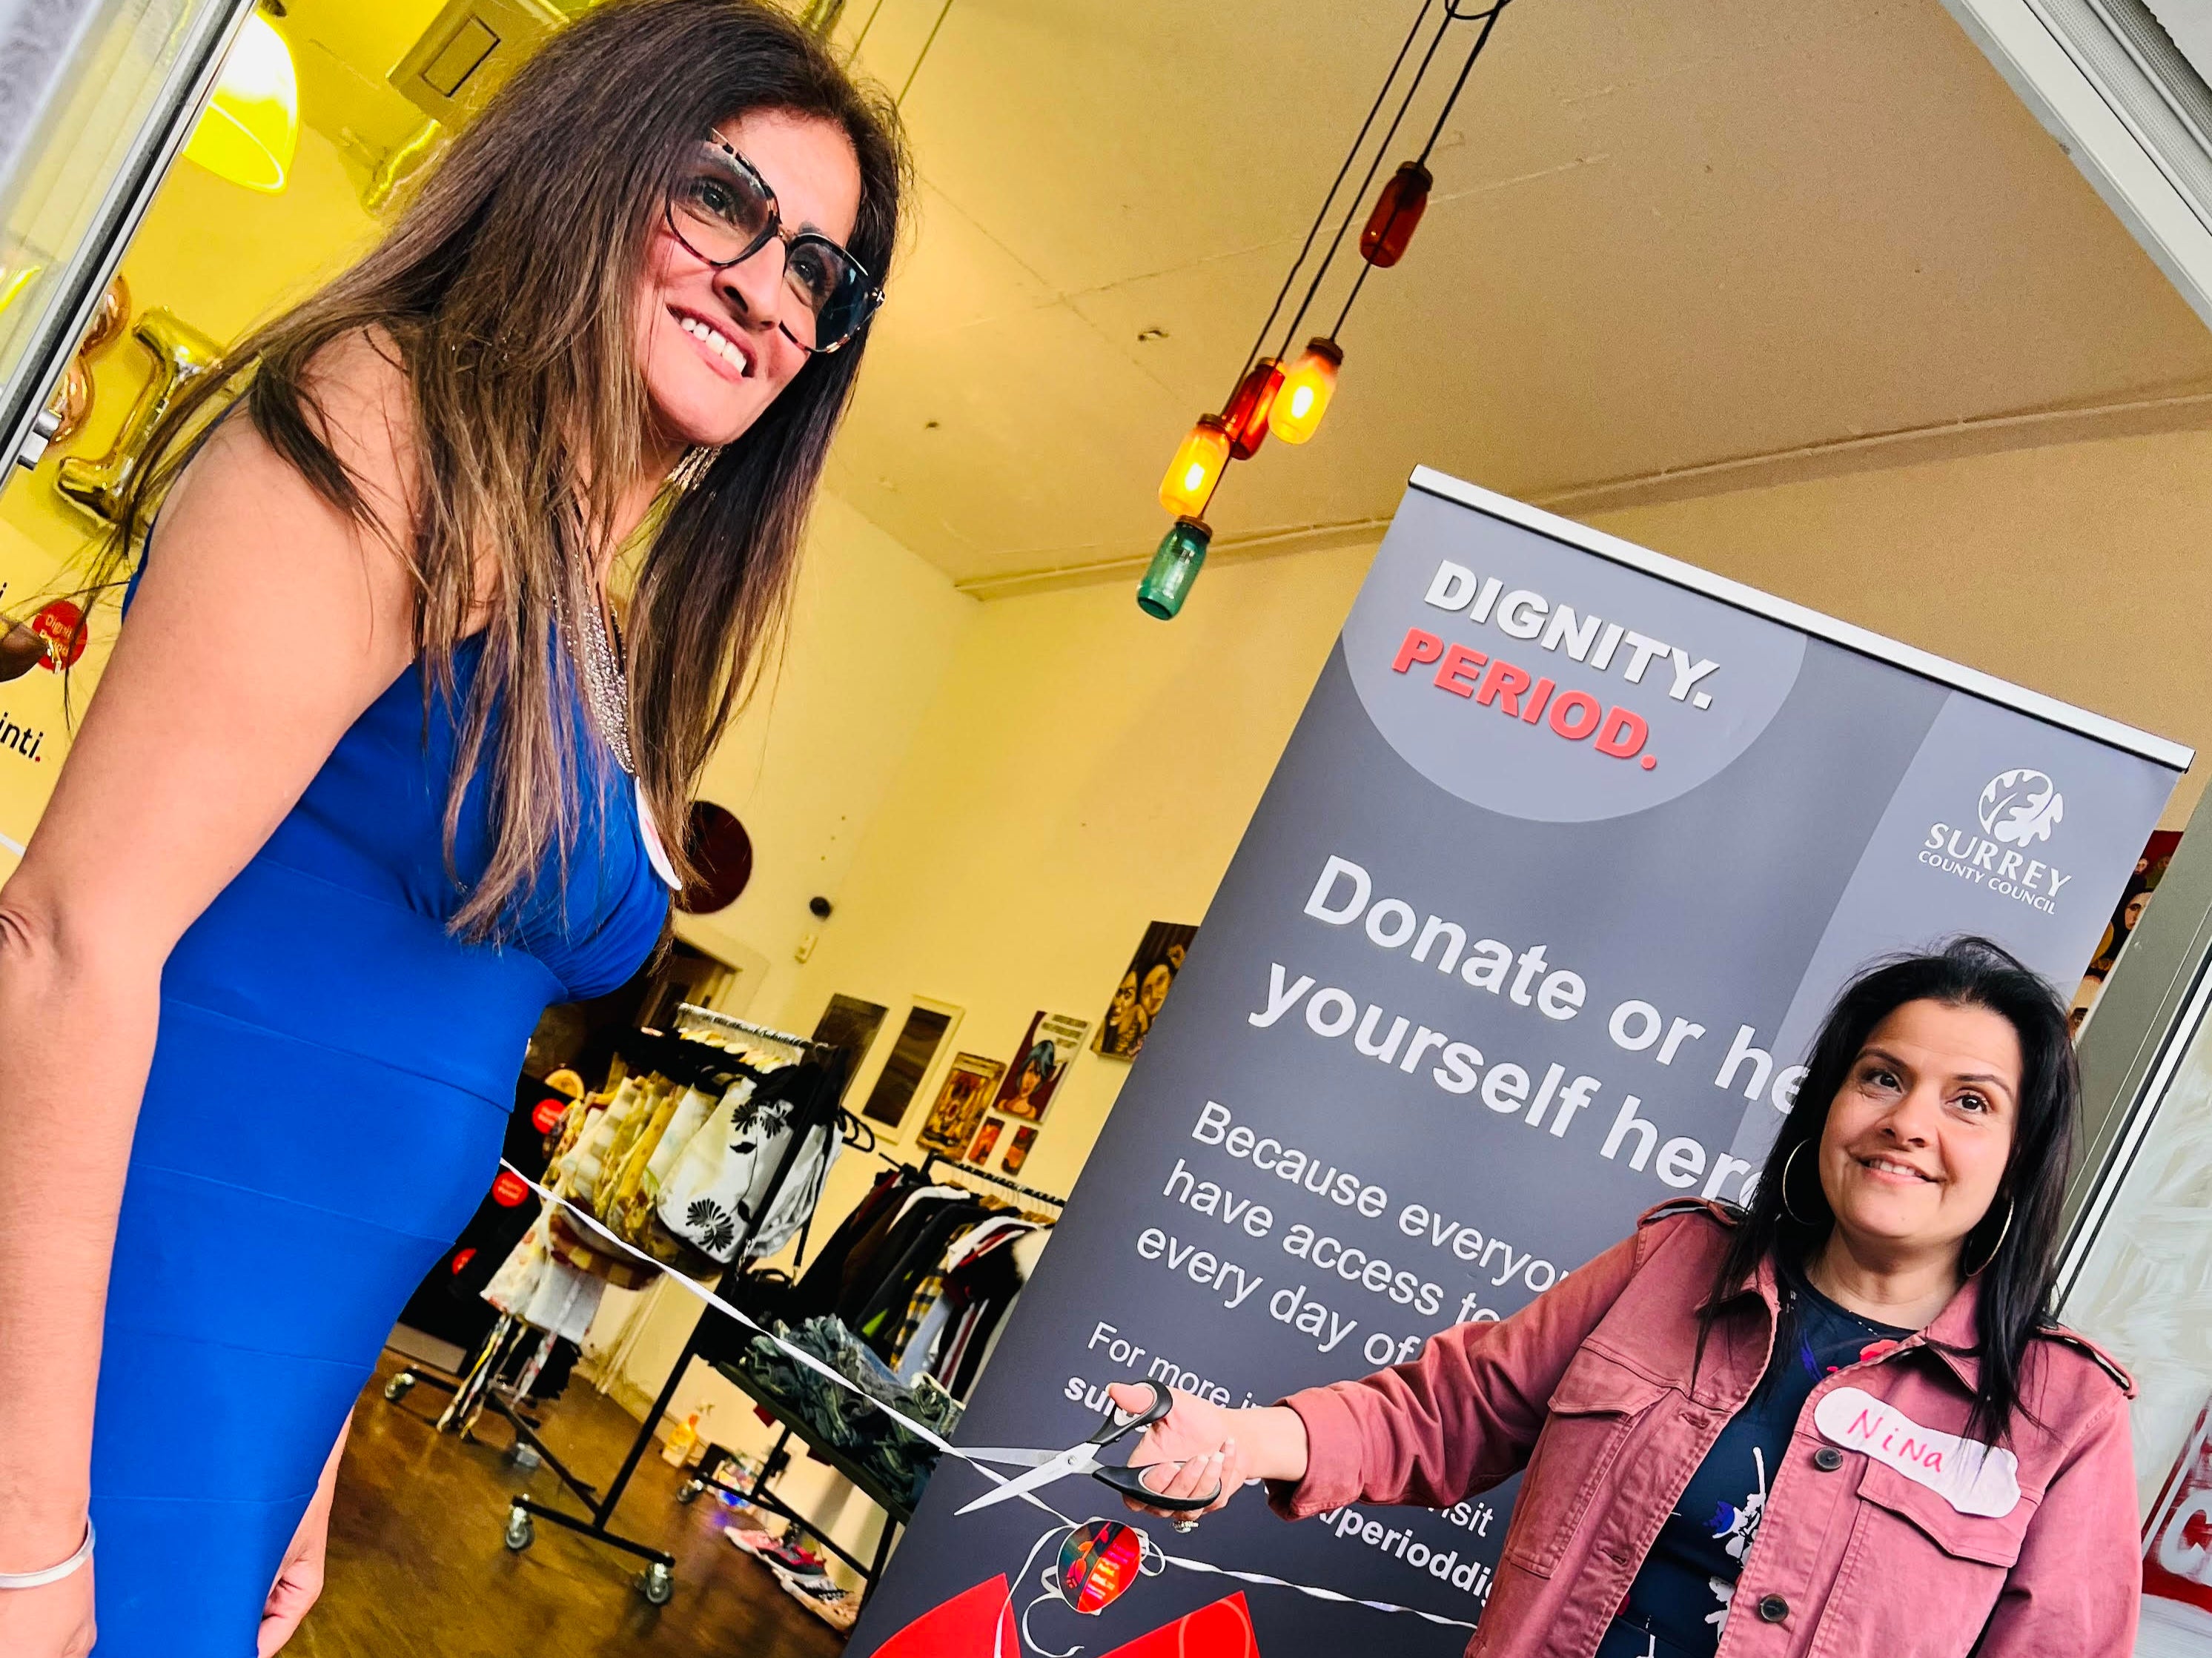 Manjit K Gill (left) and Nina Wadia at the opening of the Binti period charity shop